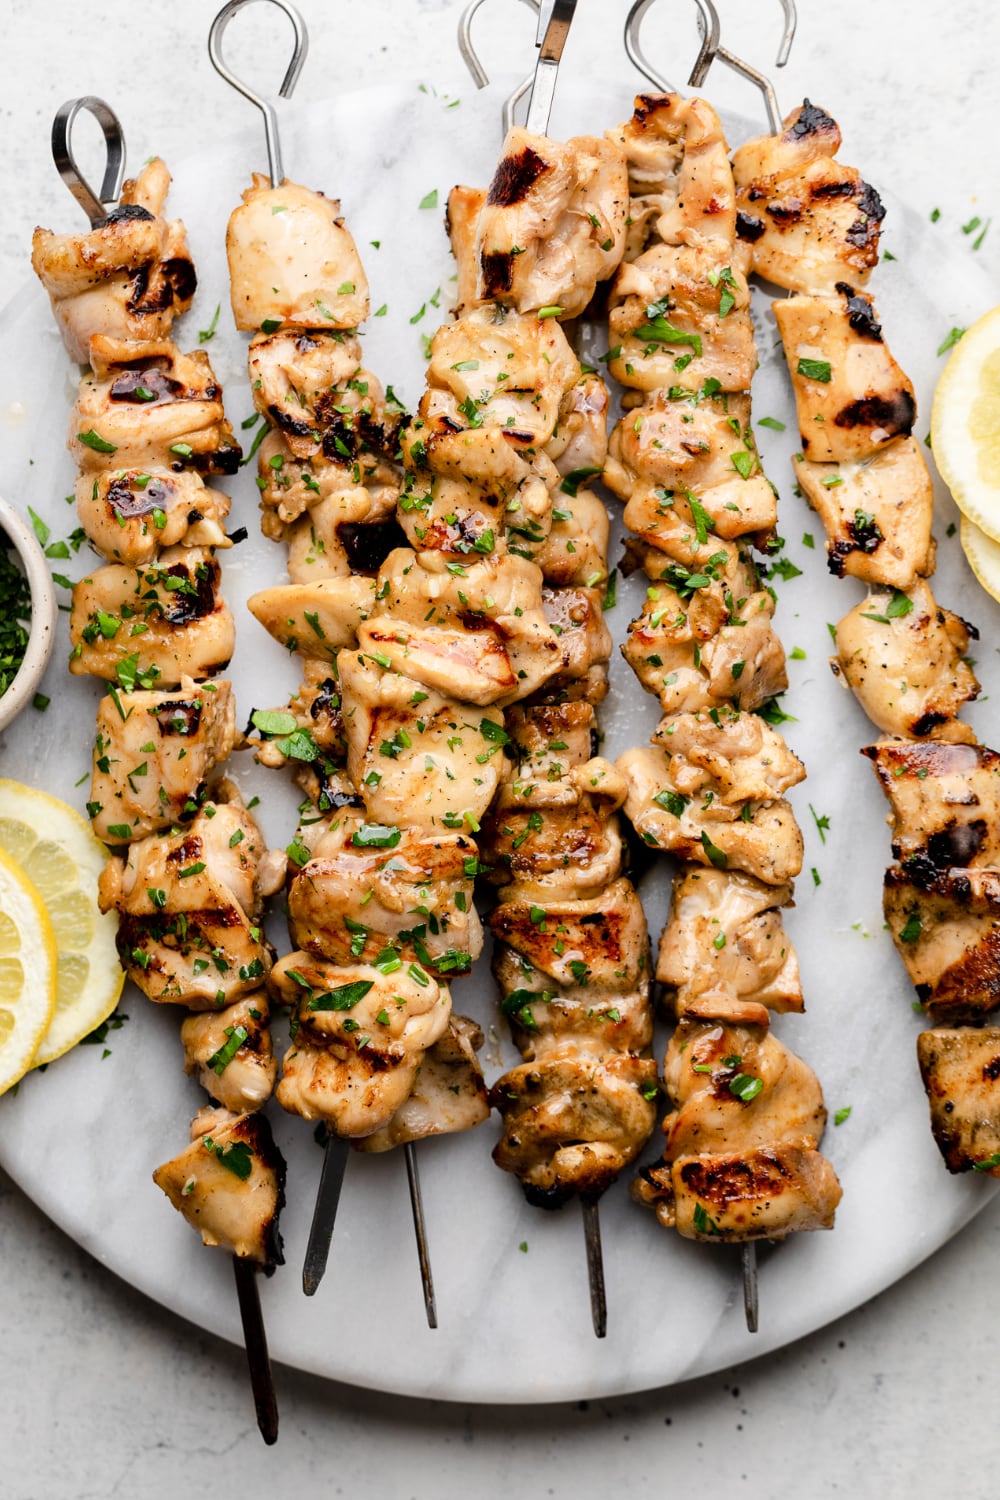 Skewers with marinated chicken and sprinkled with fresh herbs.